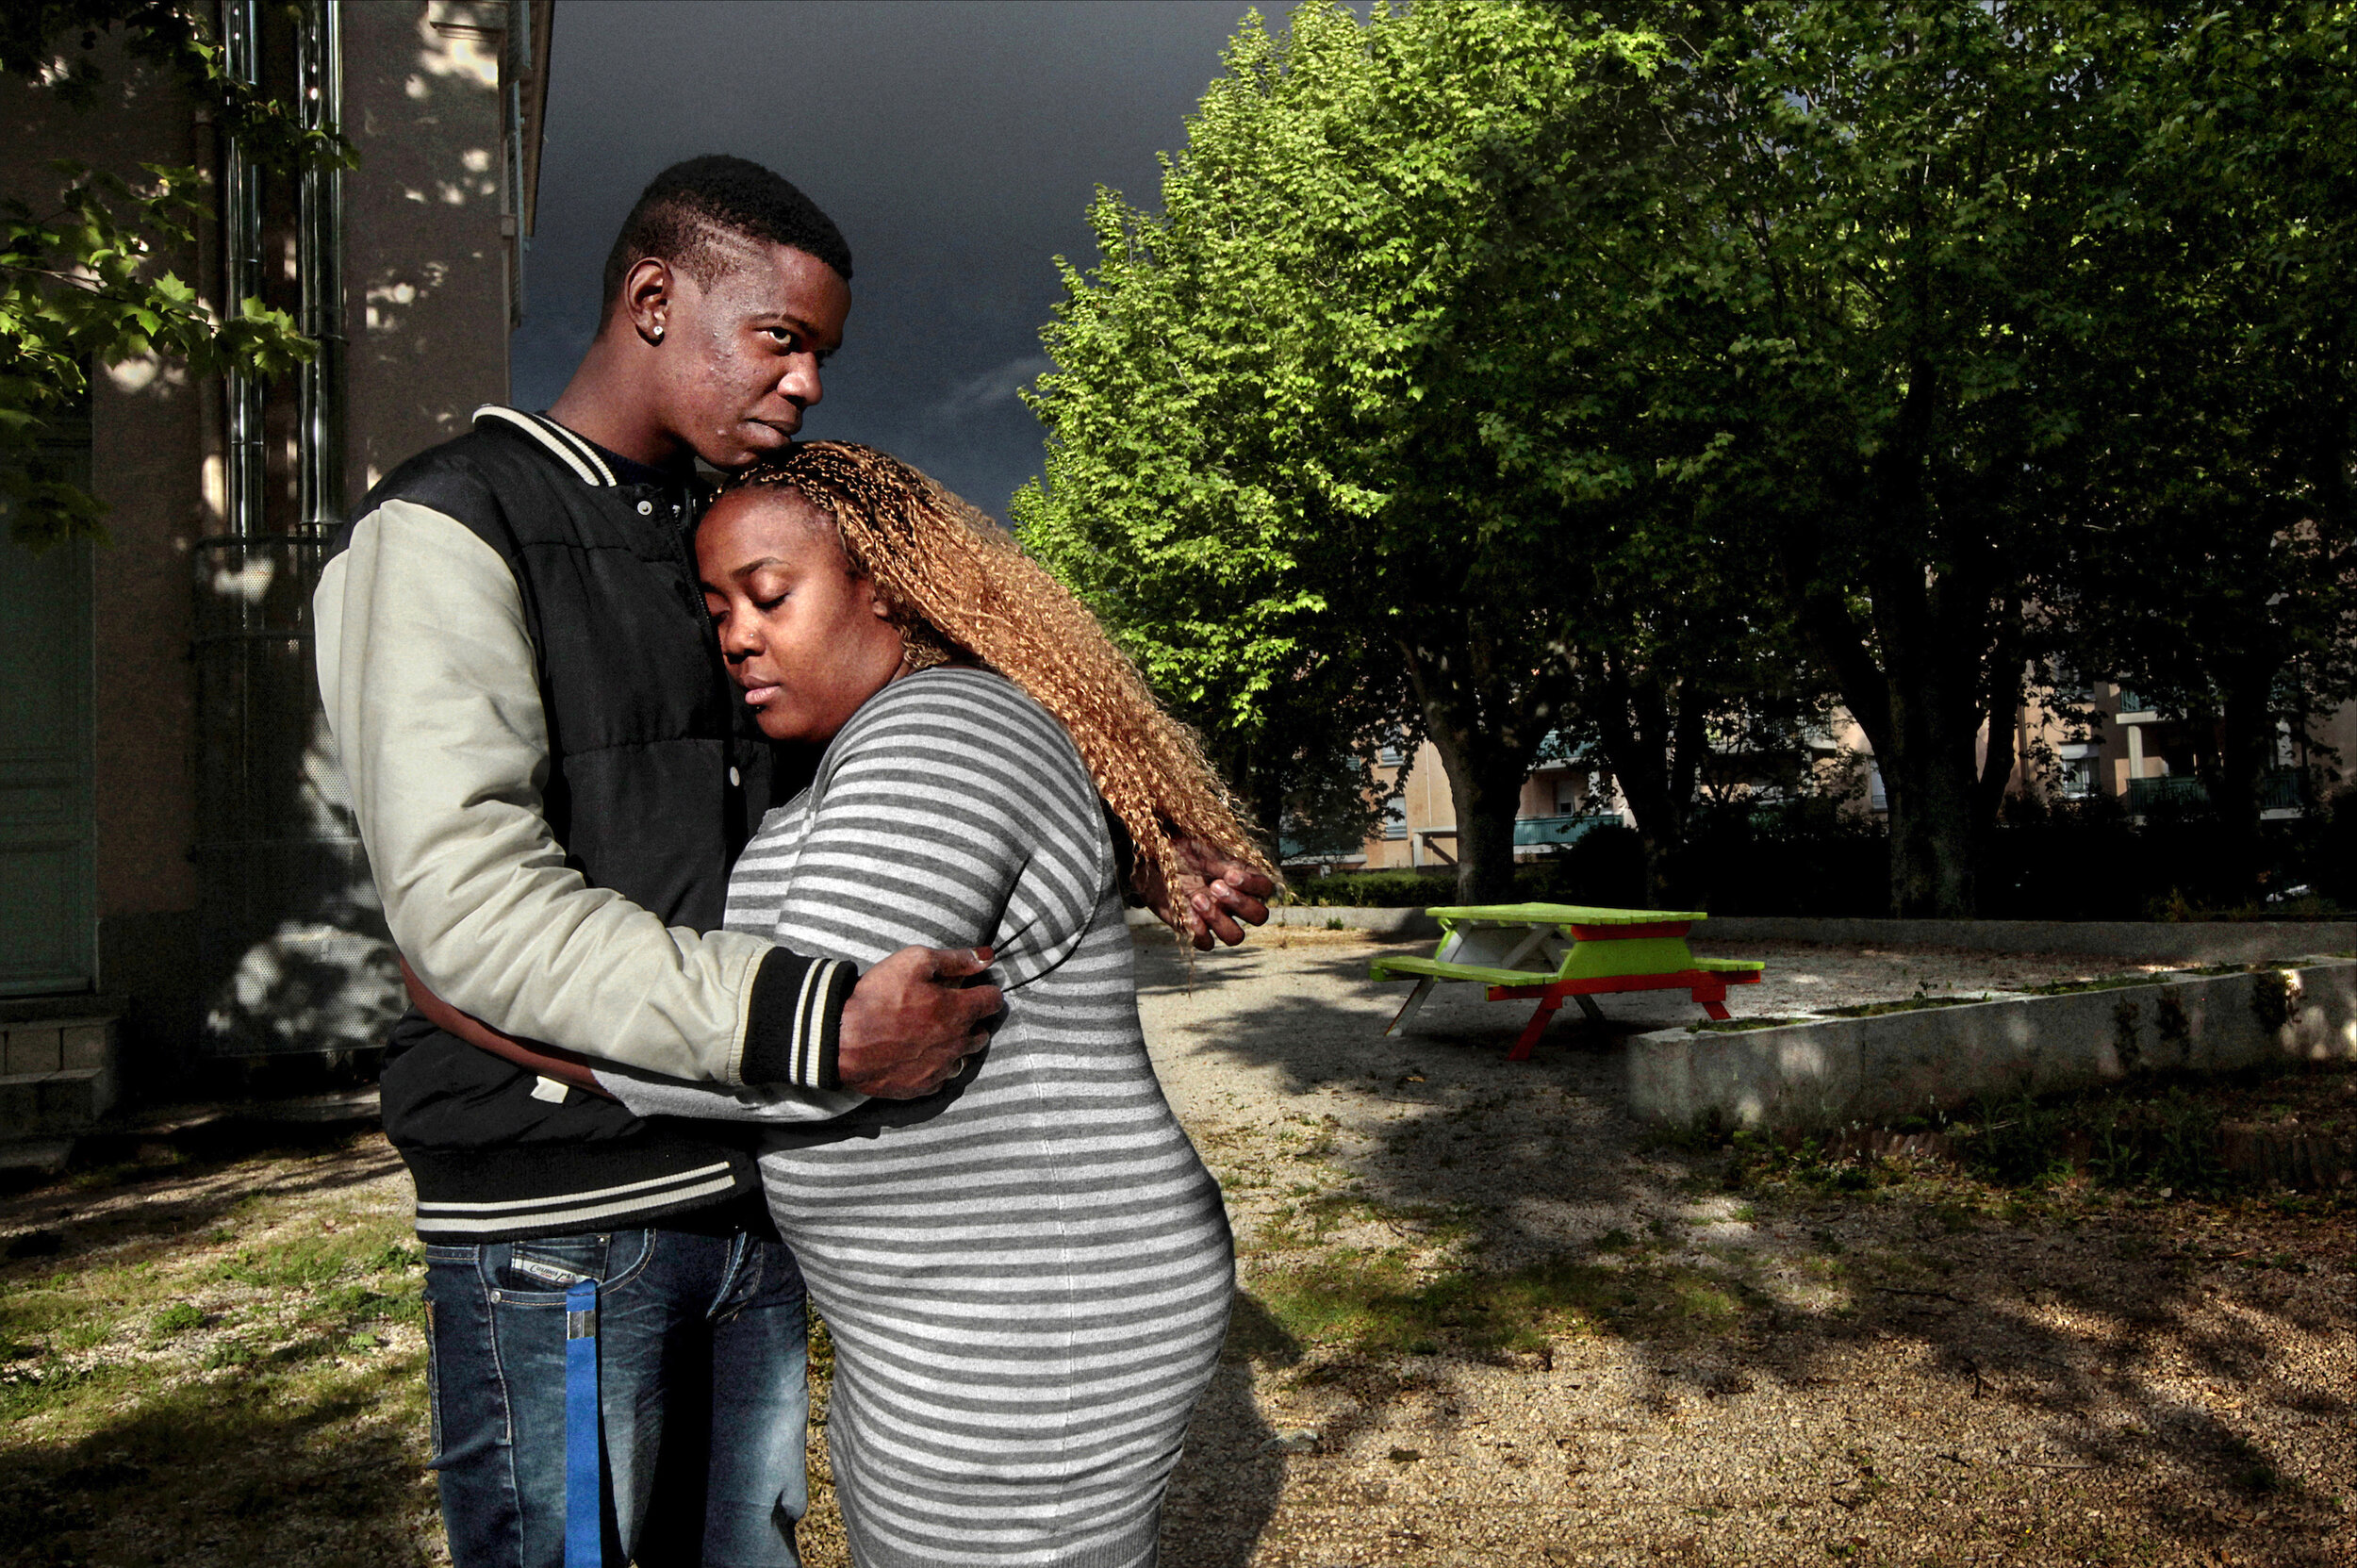   France. Marseille. 2014. Malika Ibrahima with her boyfriend, Mathieu Cocly, at La Roseraie, an emergency shelter home for unemployed homeless young people.        